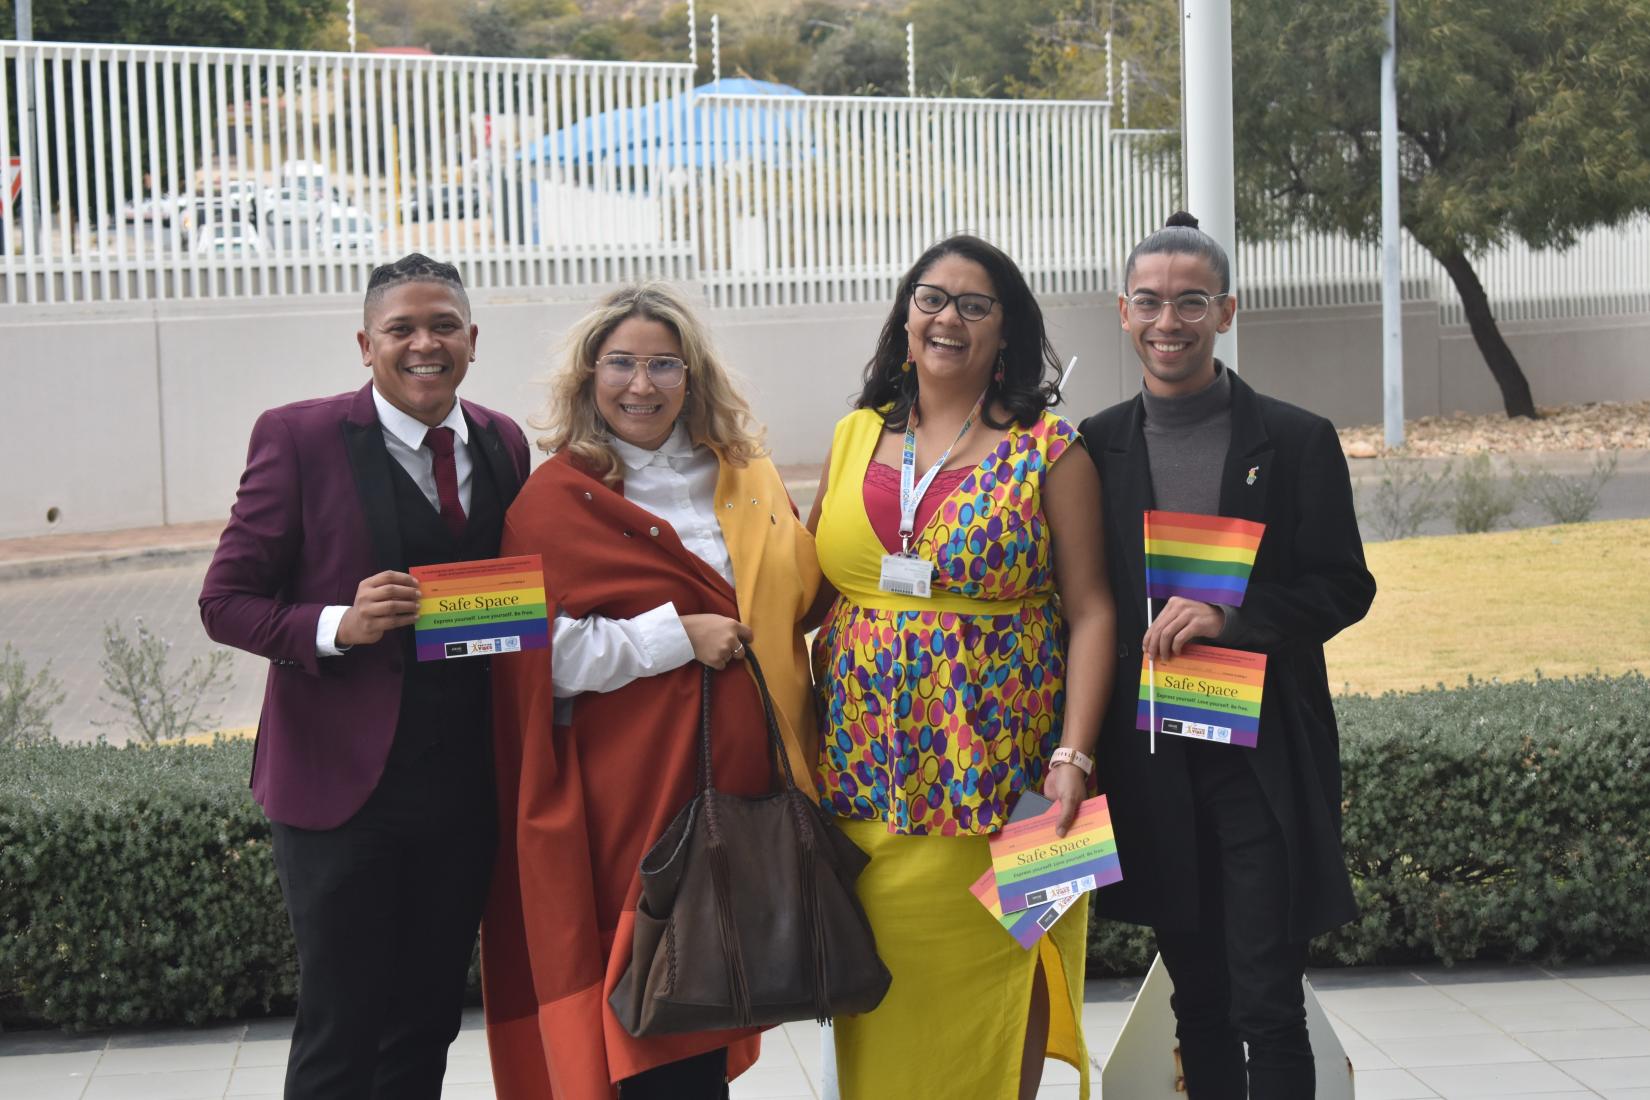 Adriano Visagie, Lize Ehlers, Geraldine Ithana, Rodelio Lewis share their joy in the momentous occasion which saw the pride flag raised at the UN house